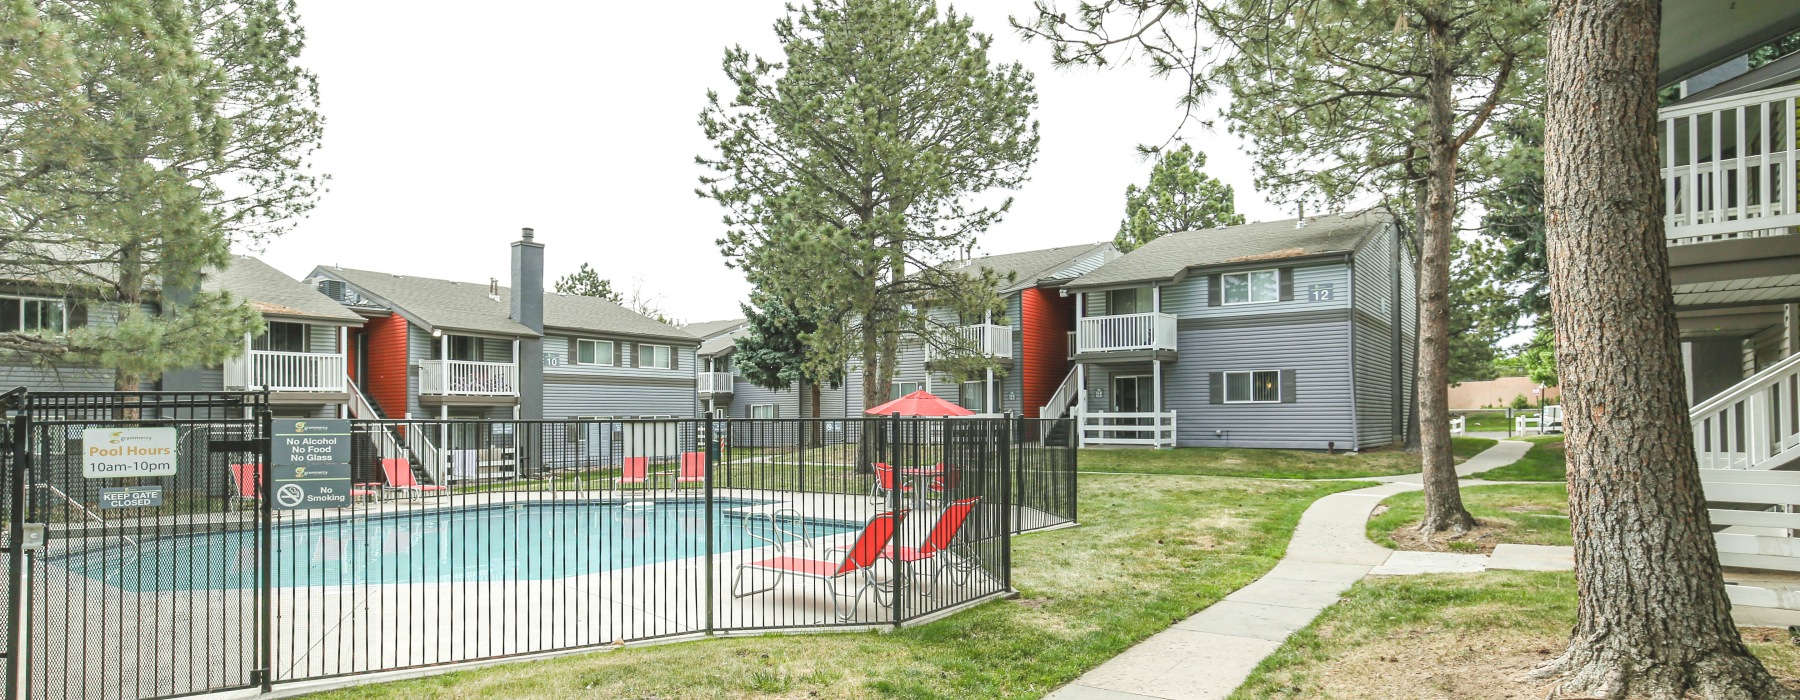 Landscaped grounds with a pool and fence